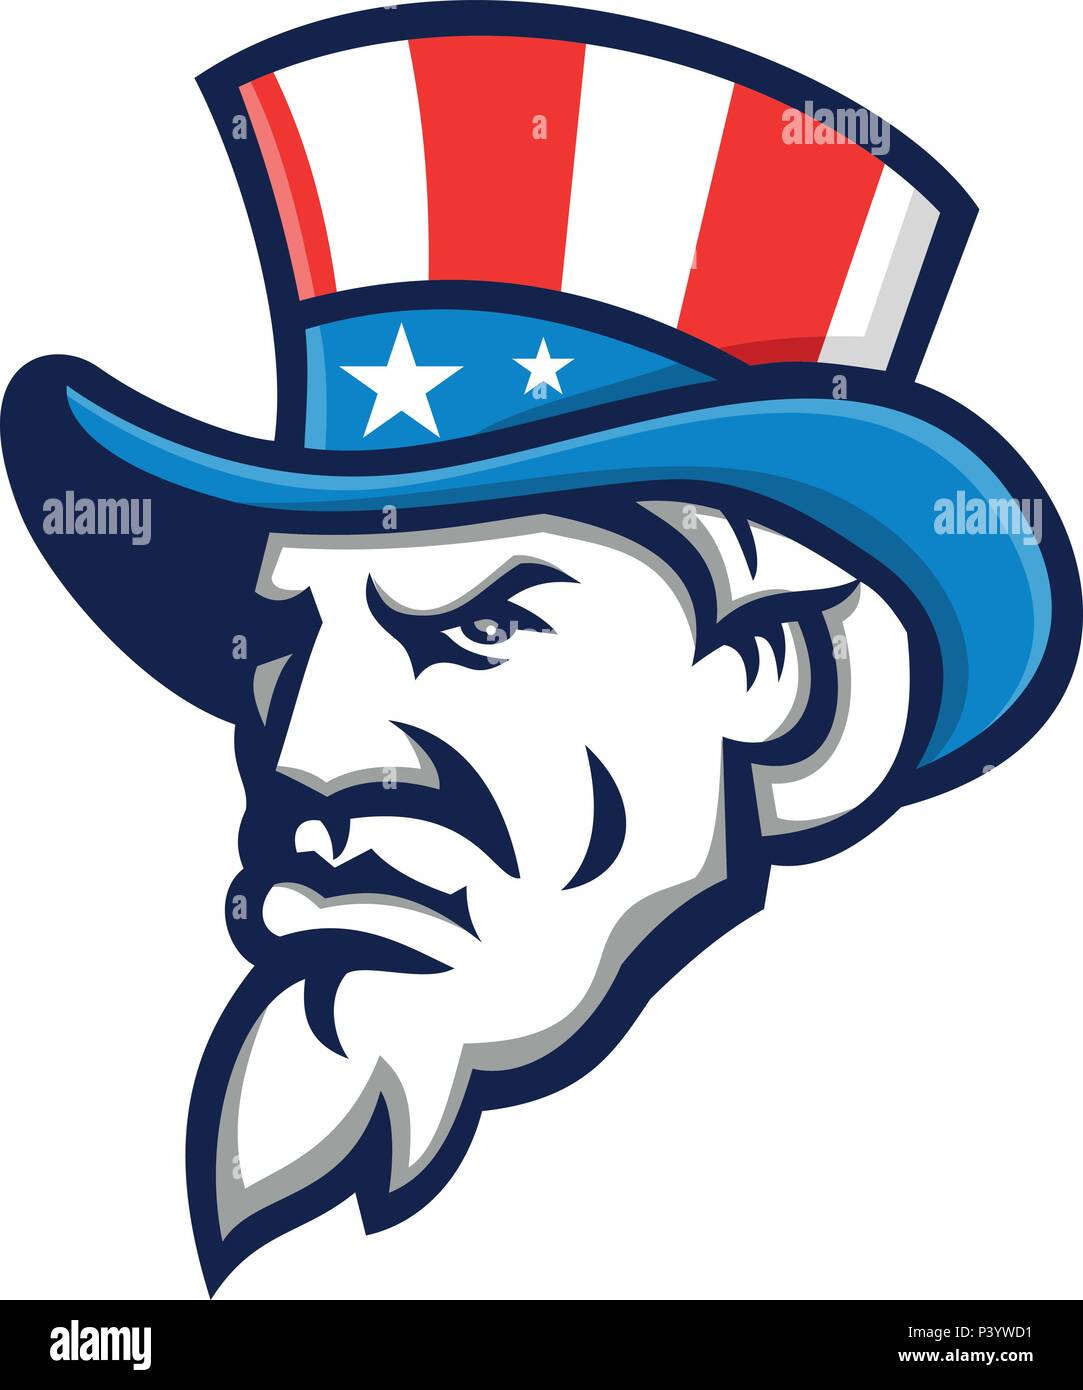 Mascot icon illustration of head of Uncle Sam wearing a top hat with USA  American stars and stripes viewed from side on isolated background in retro  Stock Vector